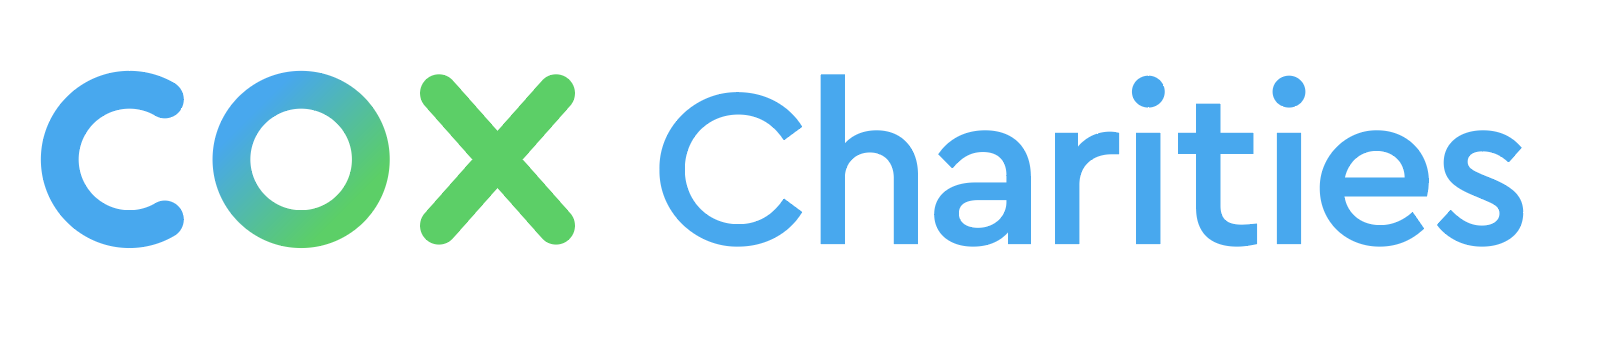 Cox_Charities_Logo_Med.png